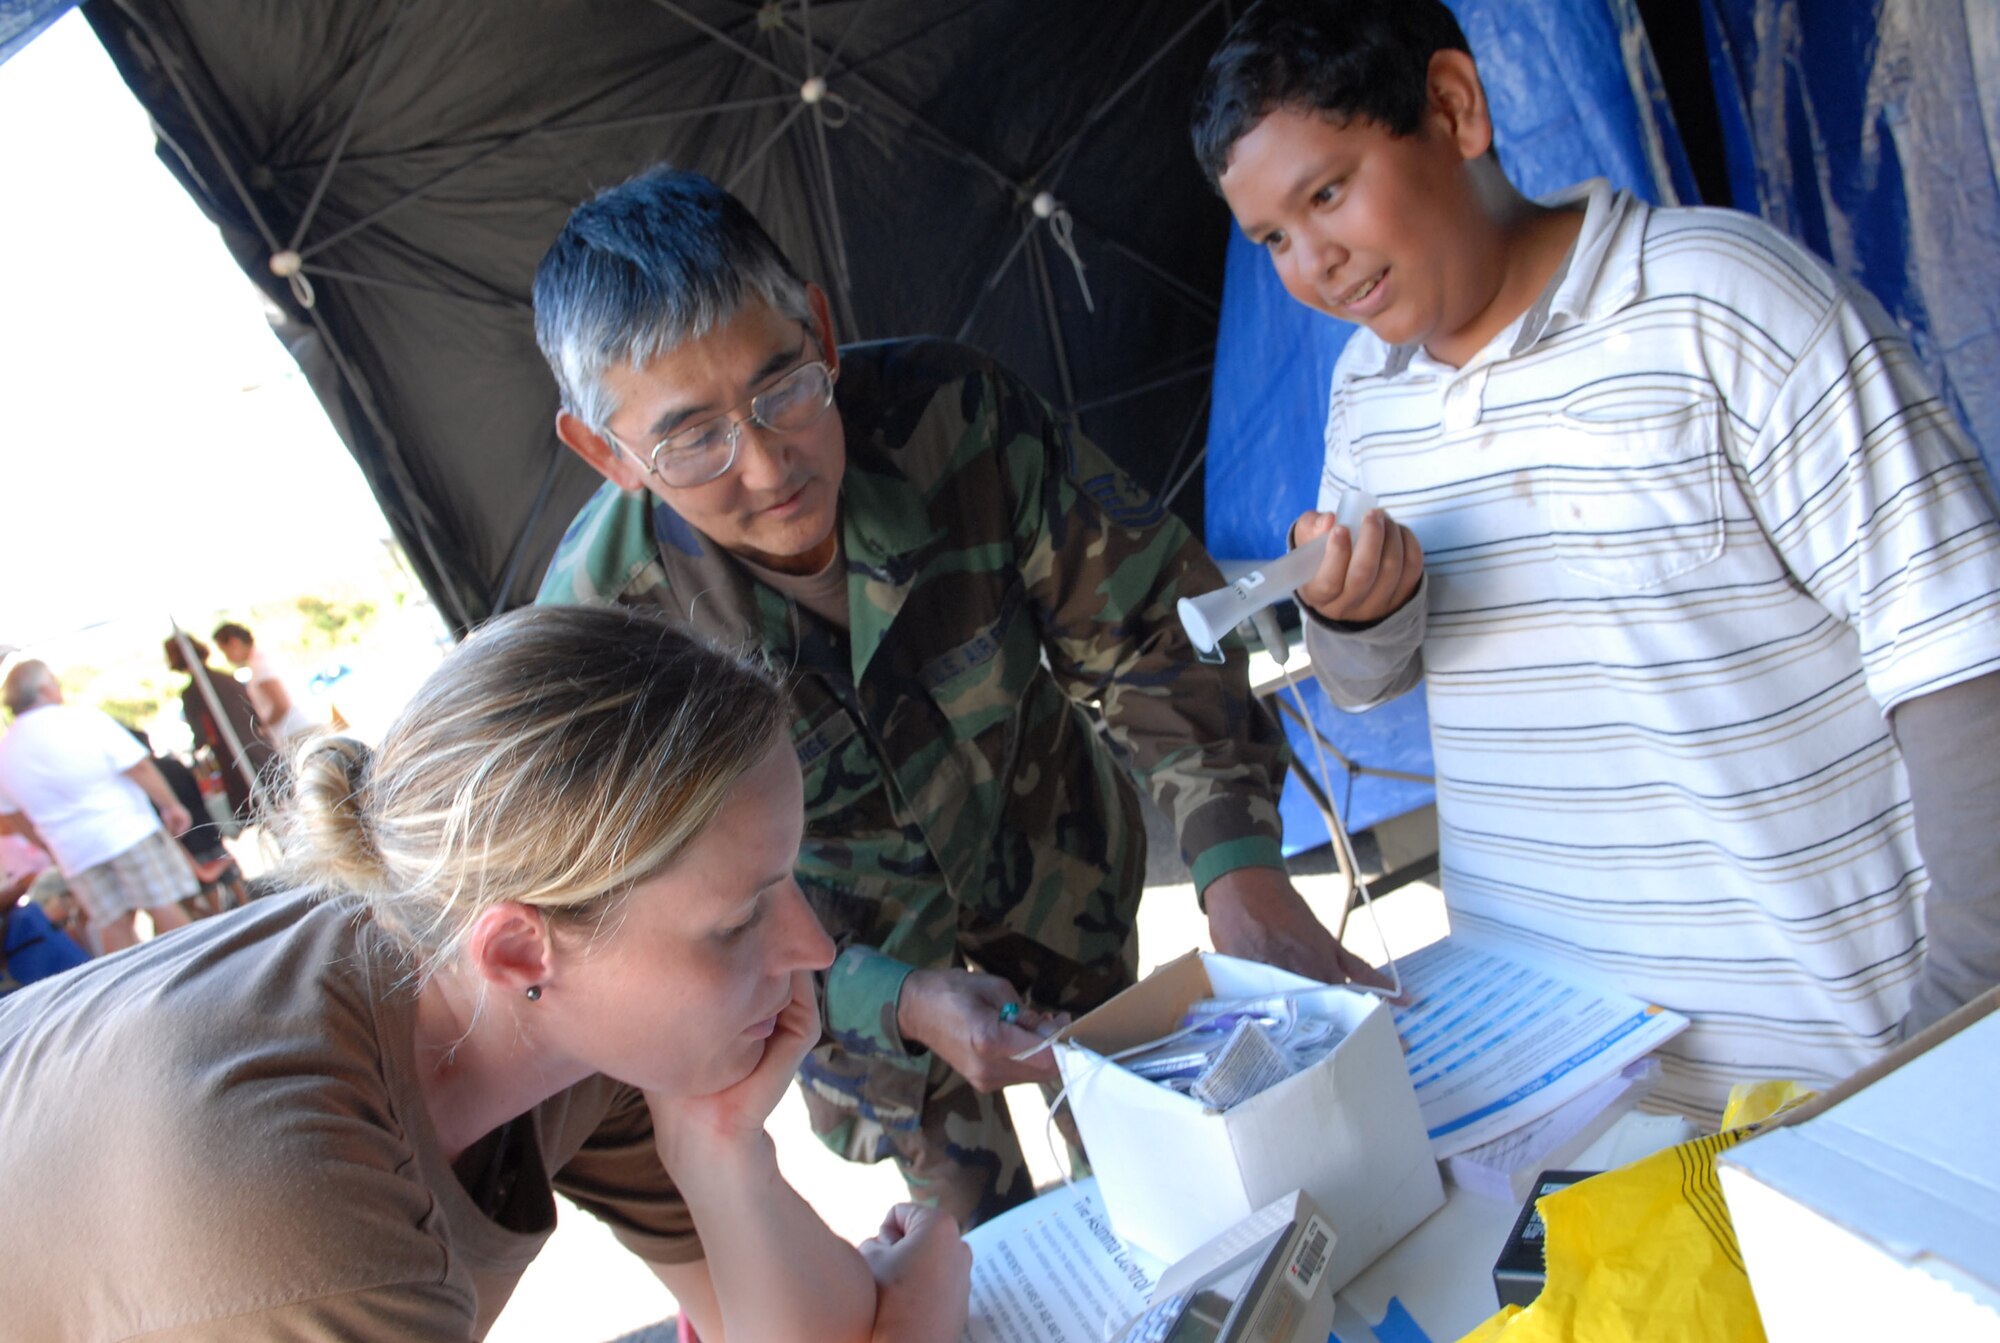 SSgt Sarah Johnson, 149th Medical Group, San Antonio, TX and MSgt Alan Yonishige, 154 Medical Group, HIANG use a spirometer to assess the lung function of Jonah Cabiles, of Kahuku.  The free asthma screening was part of the community based project E Malama Ka